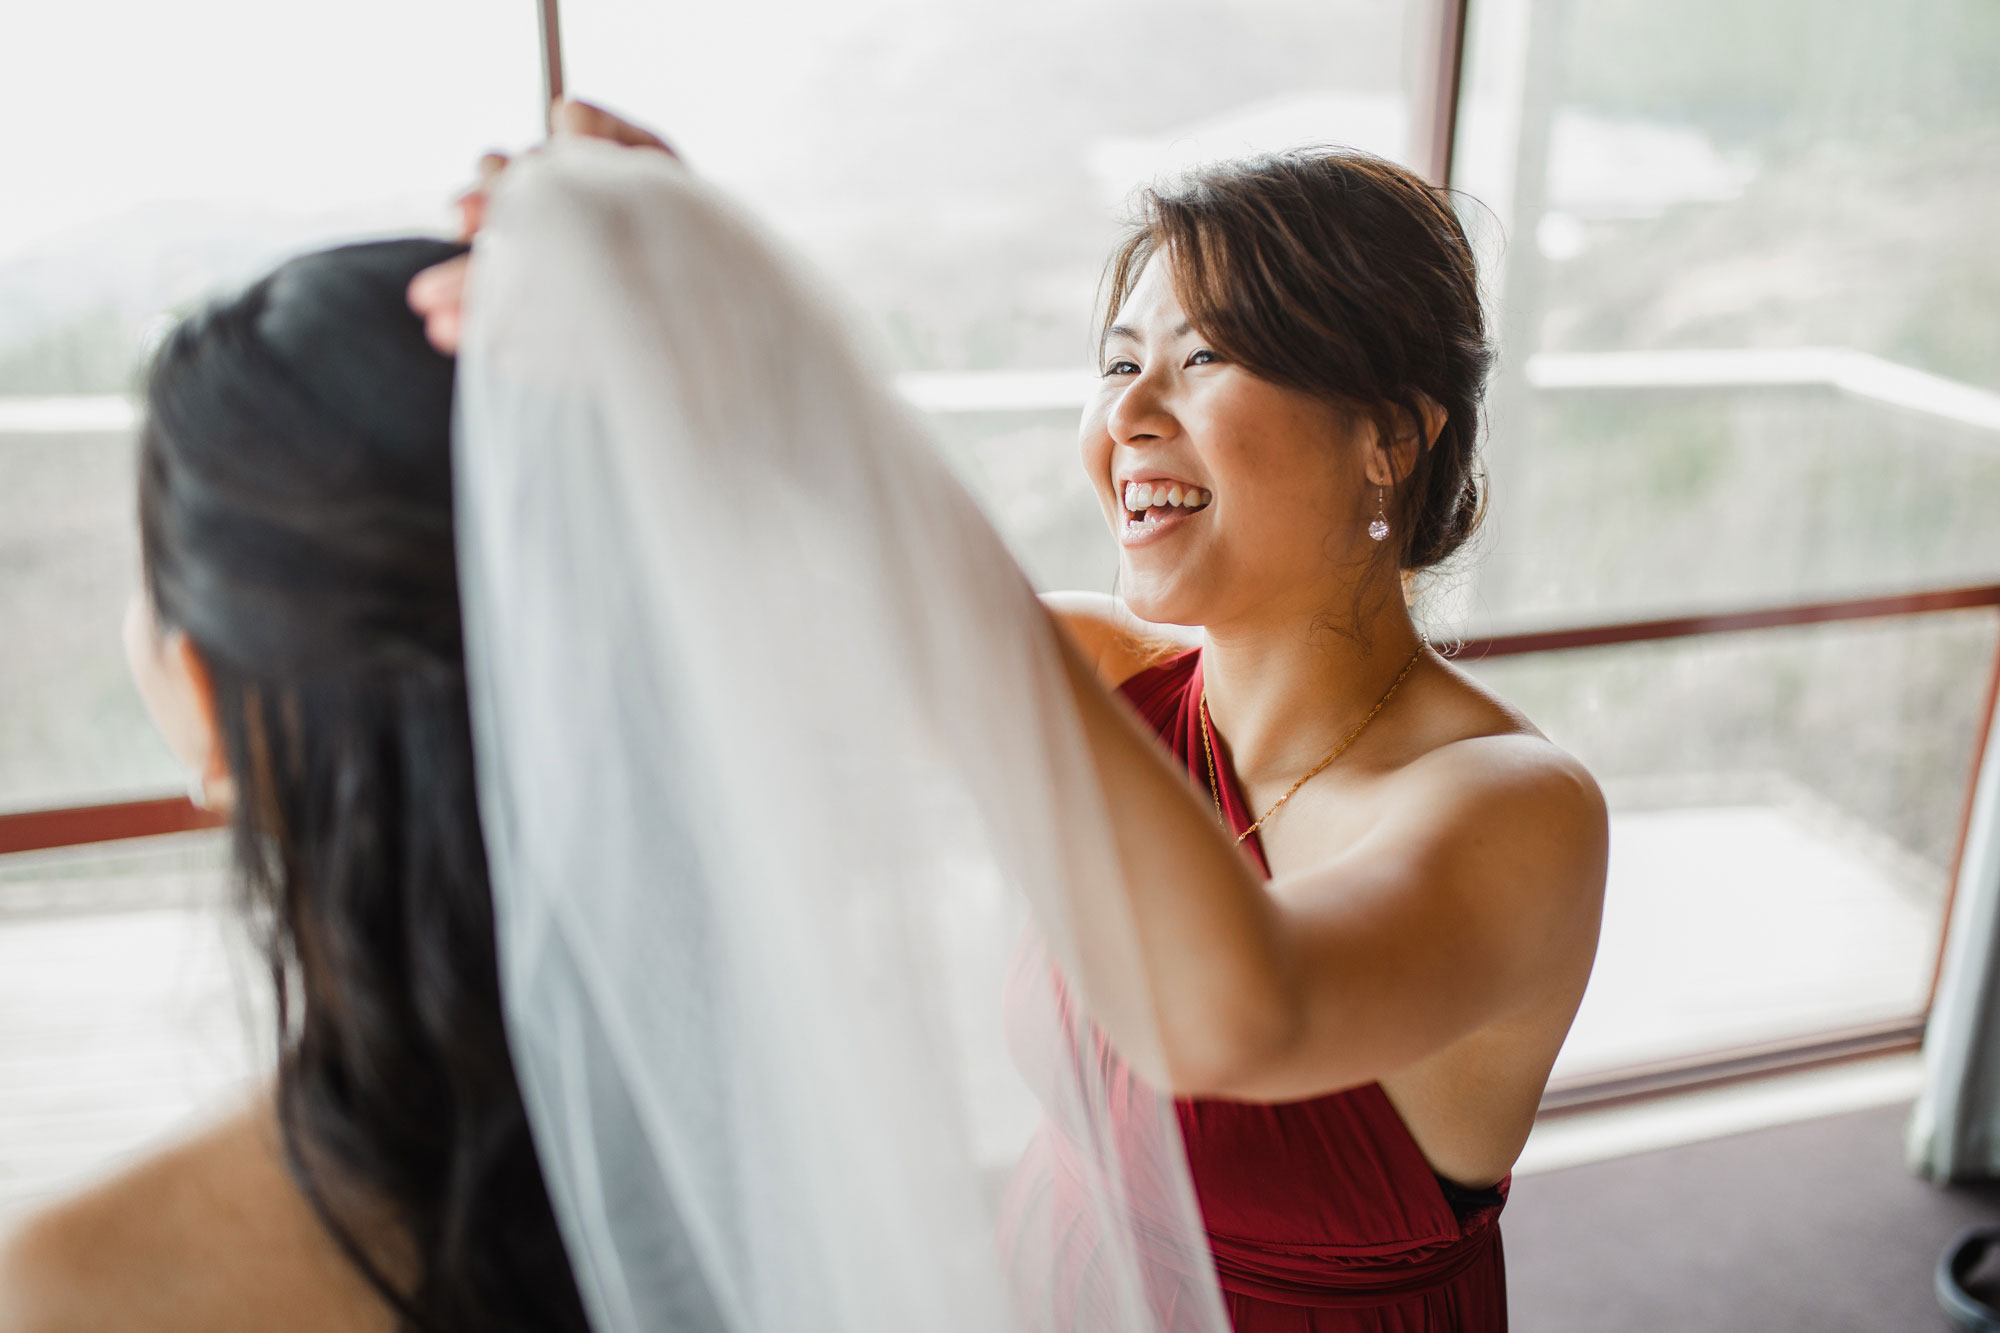 bridesmaid putting on veil for bride